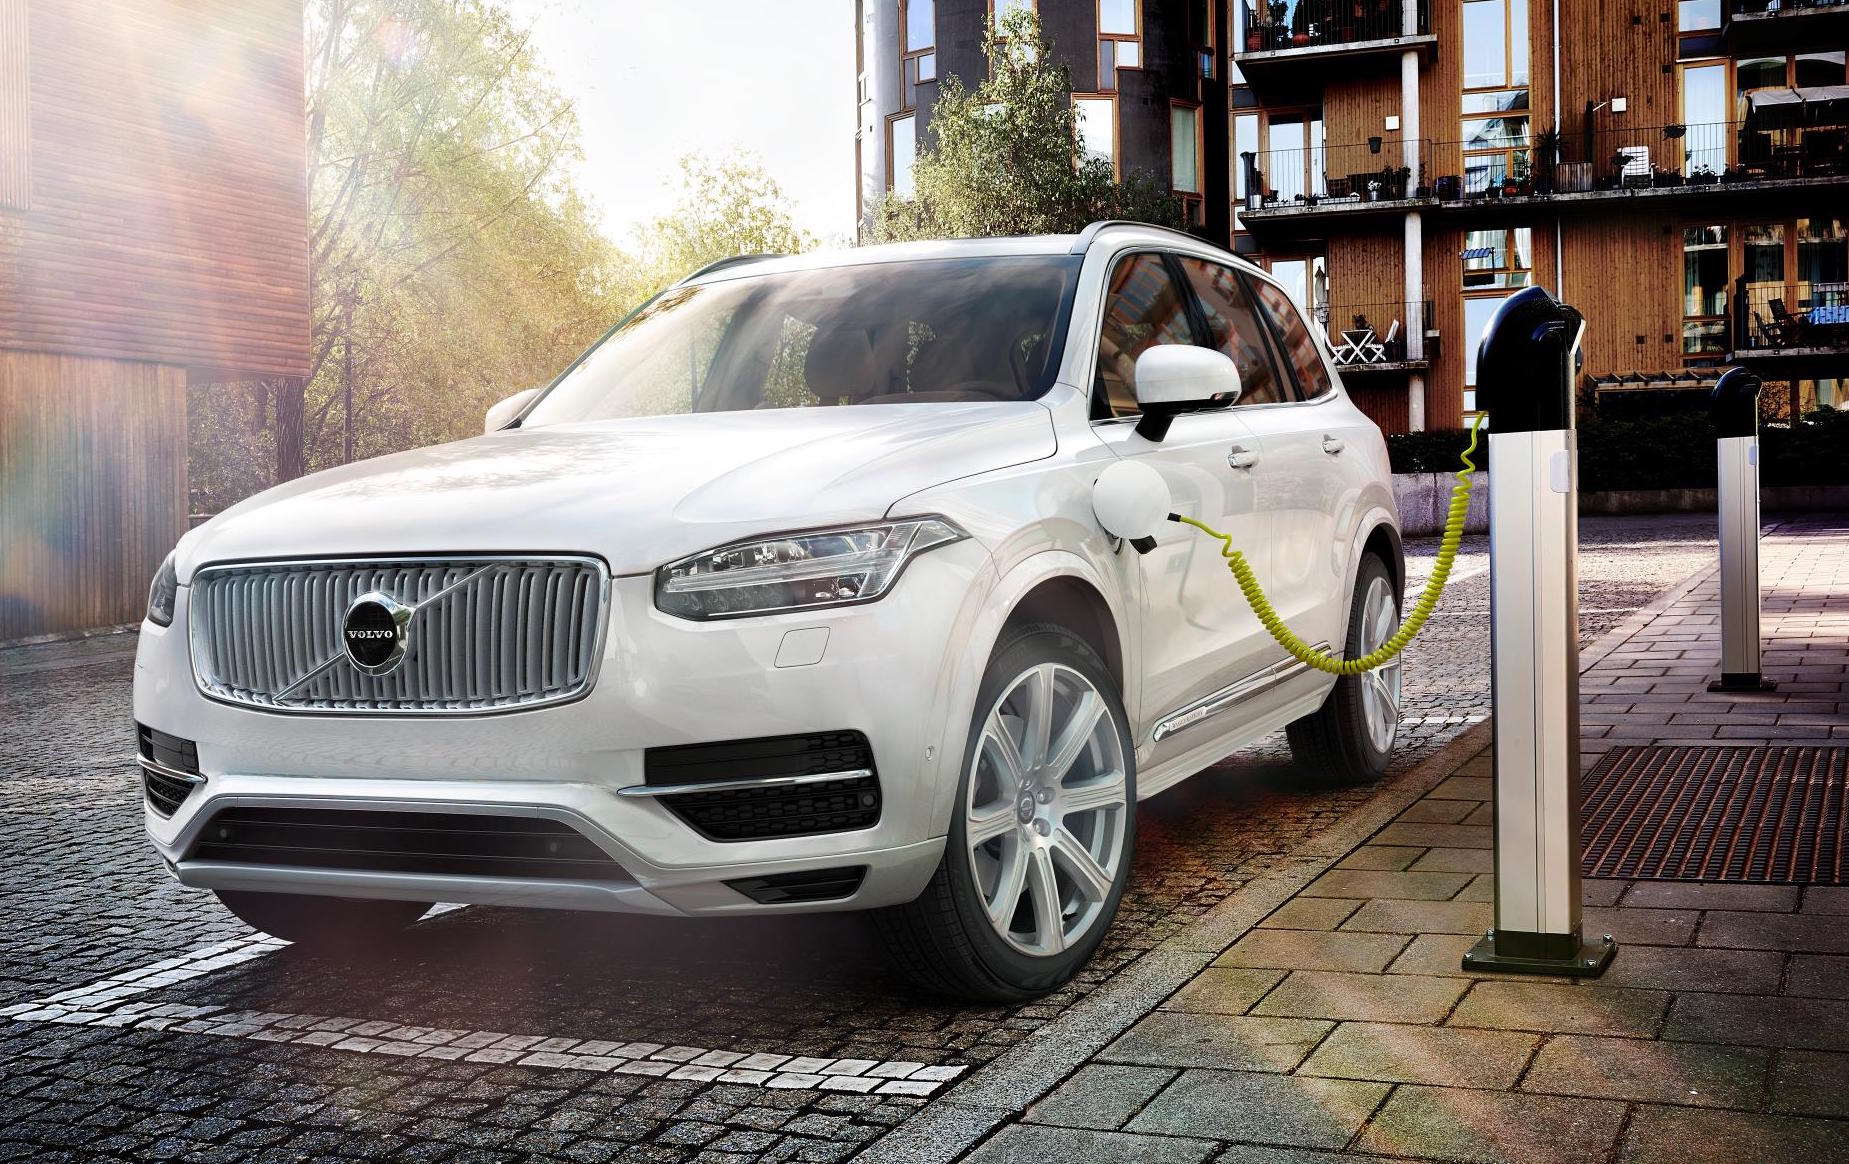 2022 Volvo XC90 getting fully electric option, updated SPA – report